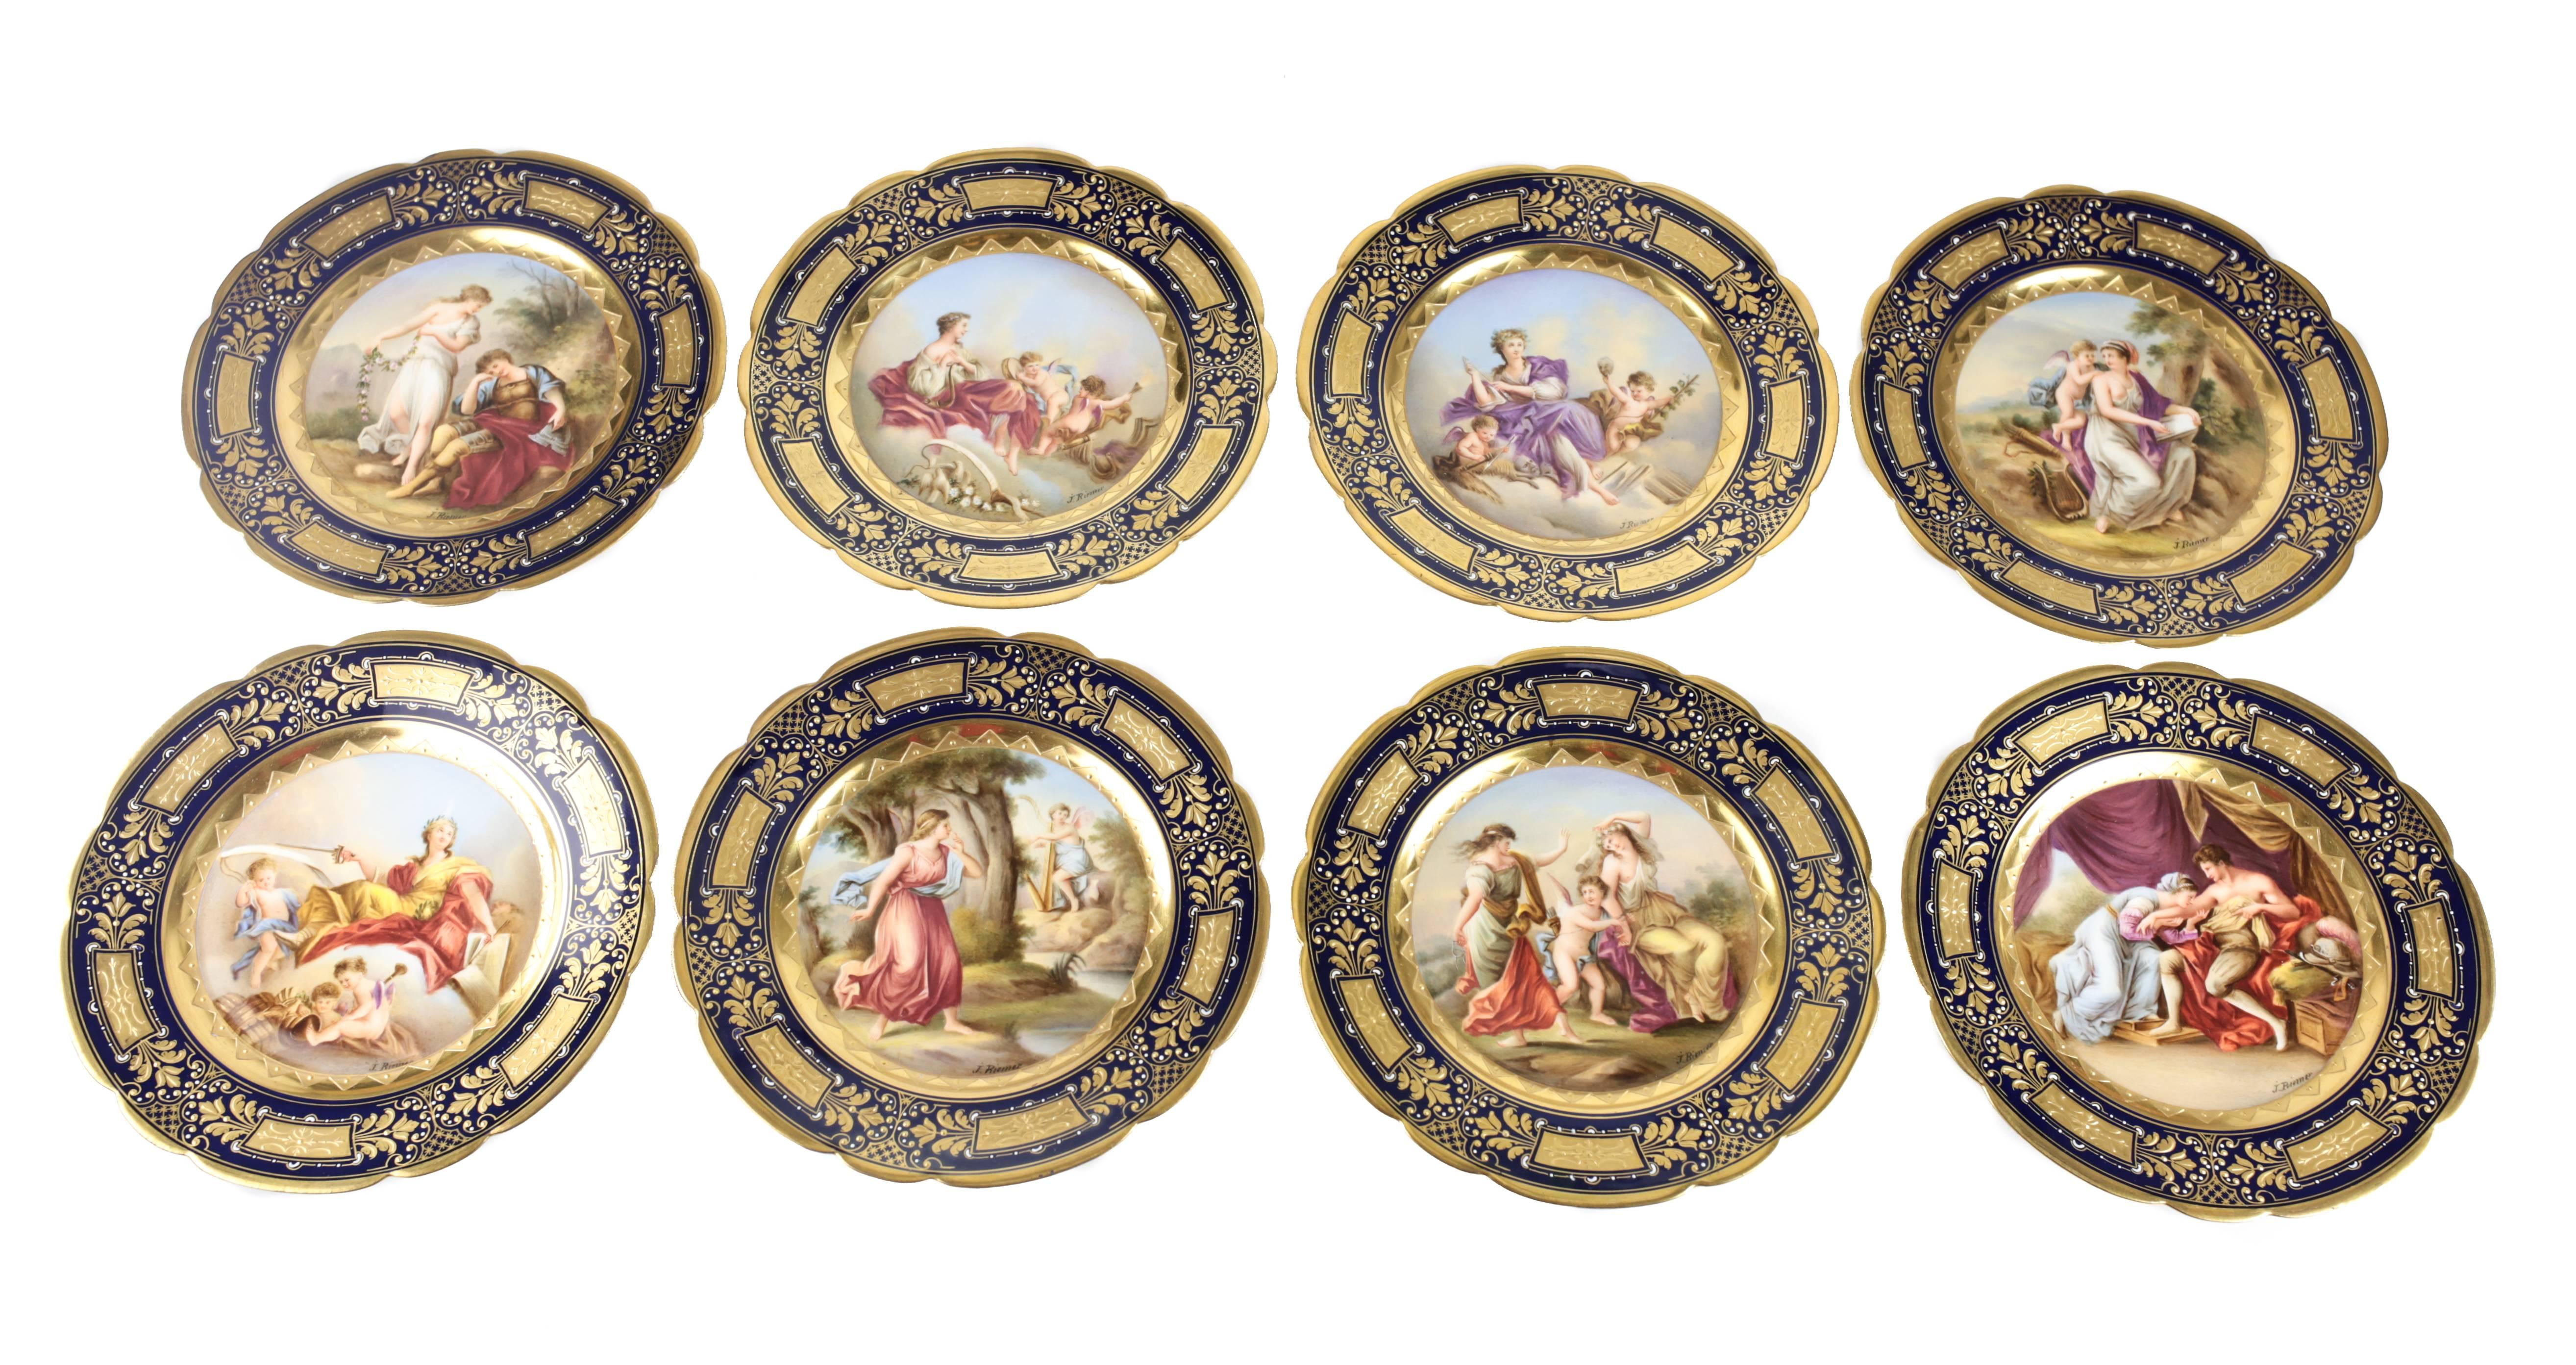 A fine late 19th century porcelain dessert service for eight consisting of eight dessert plates, one tazza and four compotes. Each with hand-painted mythological scenes by J. Riemer on a cobalt blue ground, gilt panel borders and elaborate